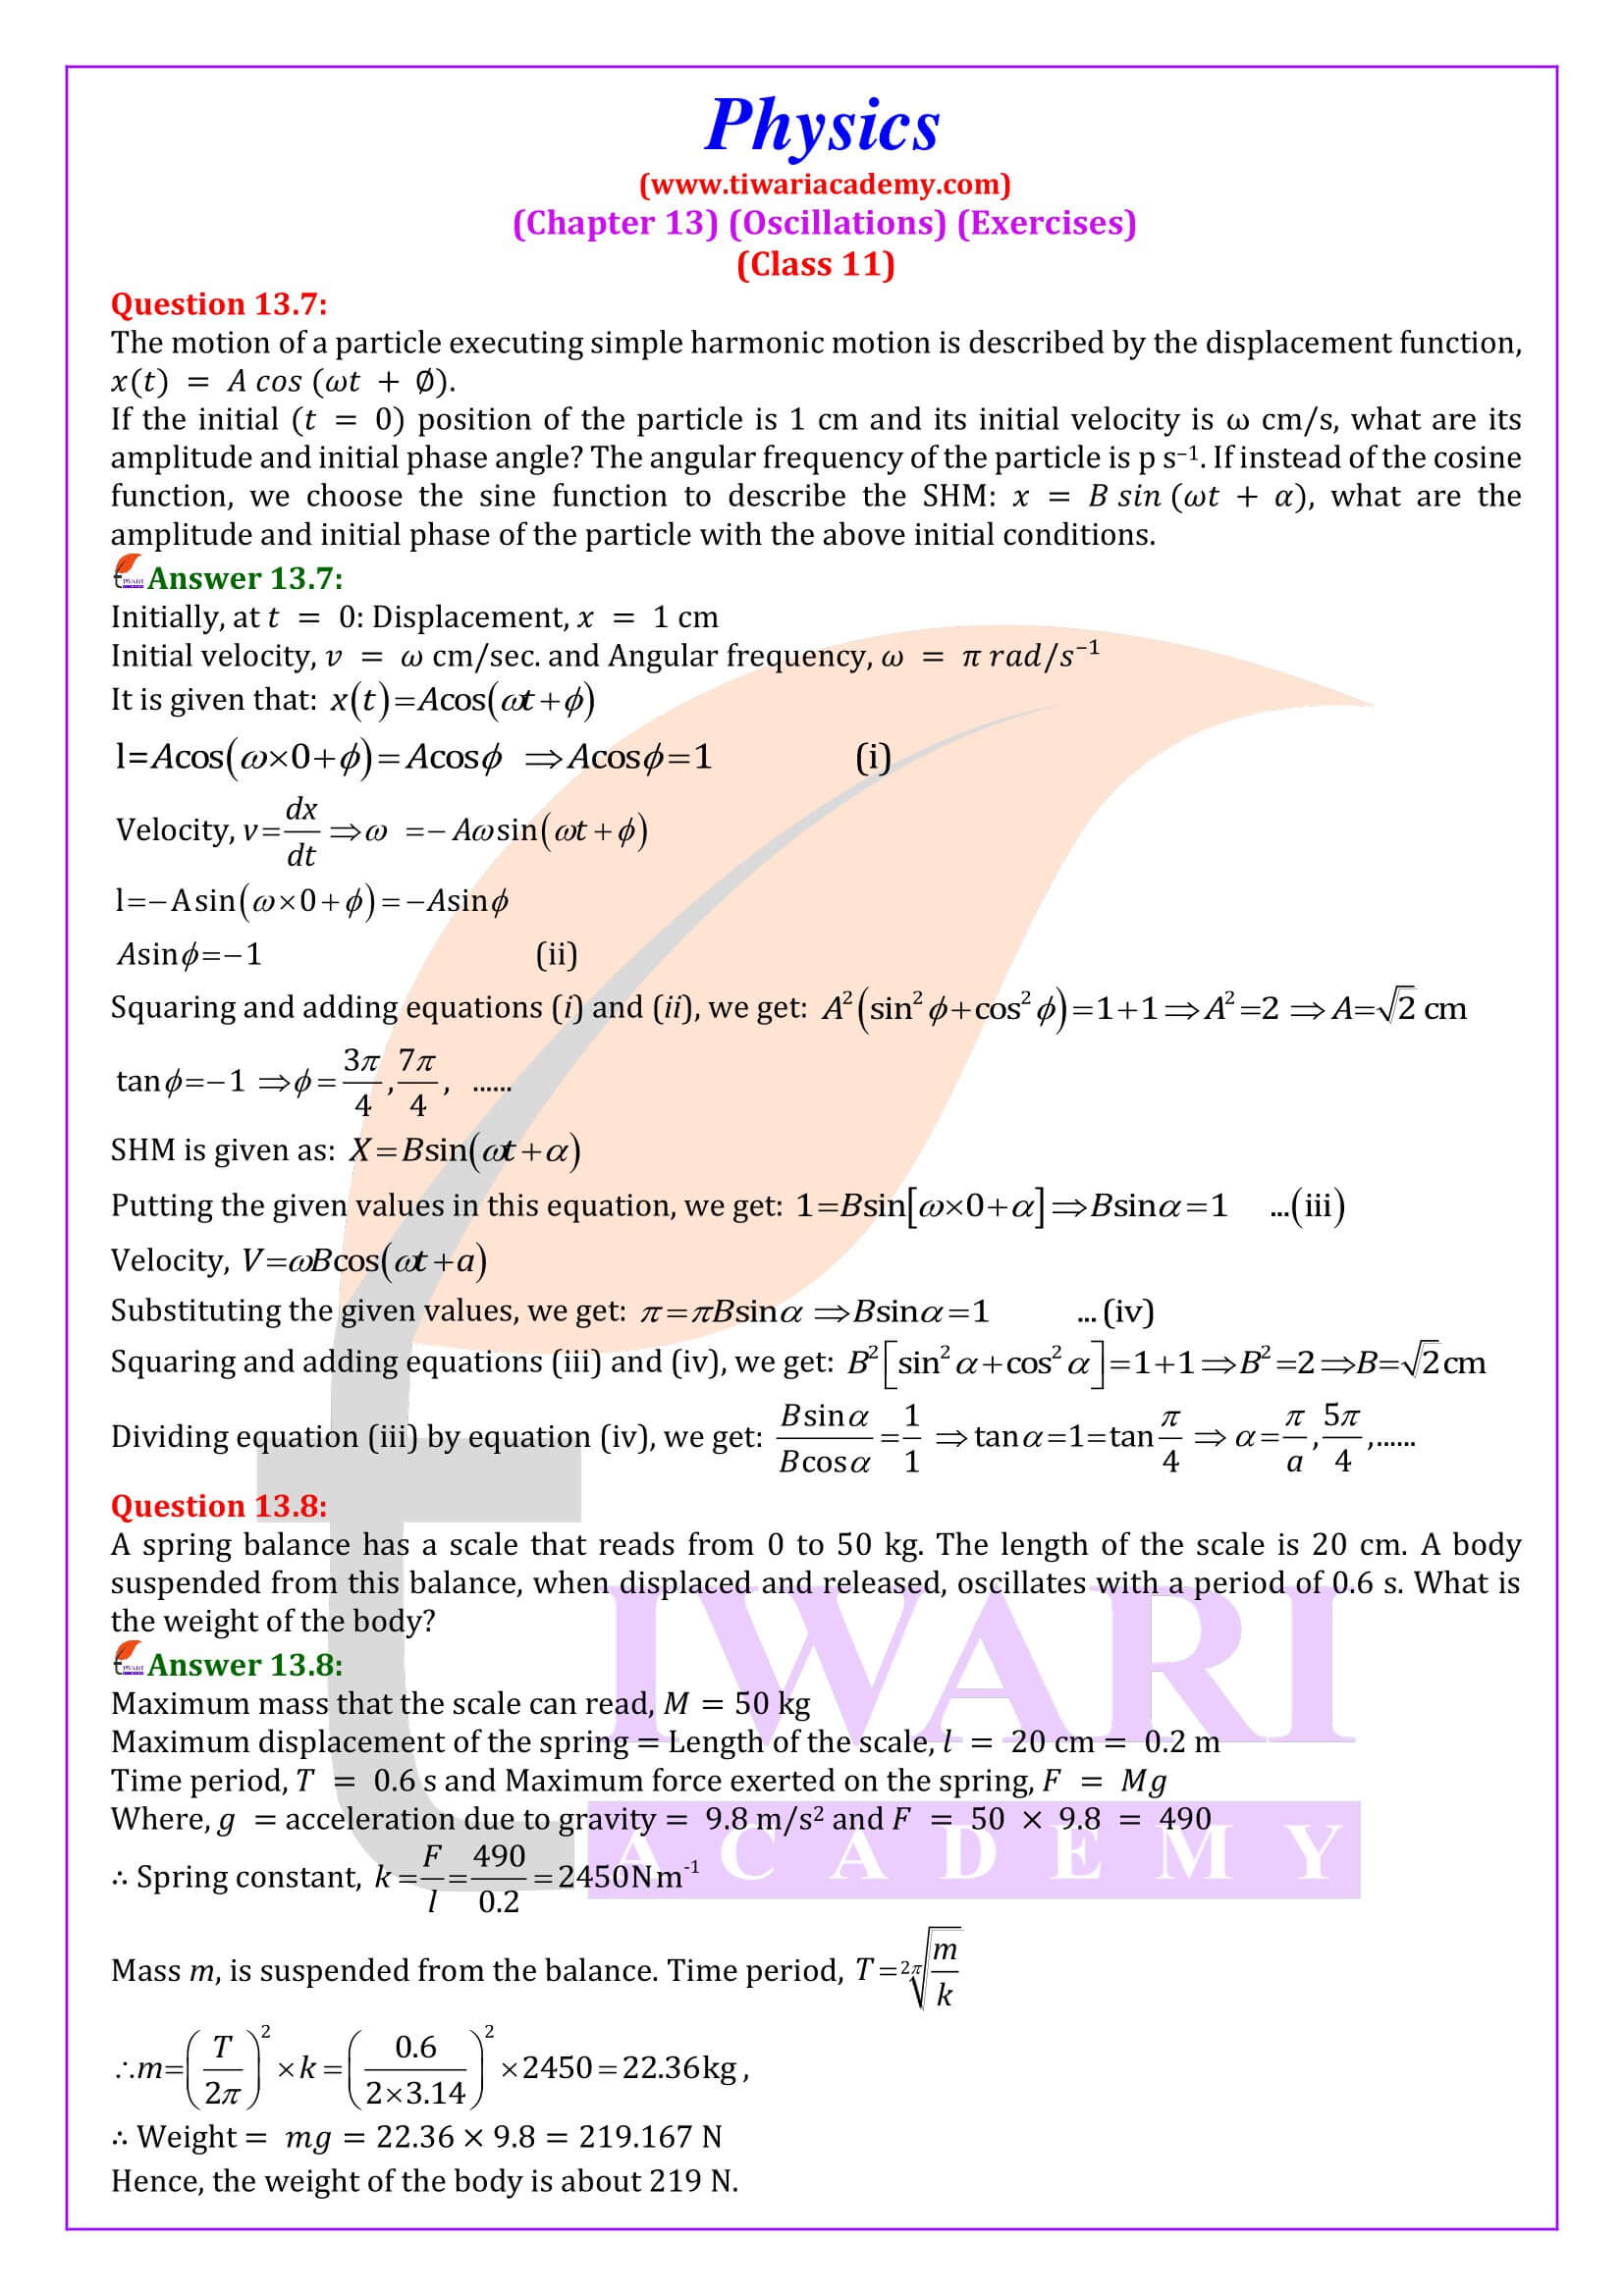 NCERT Solutions for Class 11 Physics Chapter 13 updated format